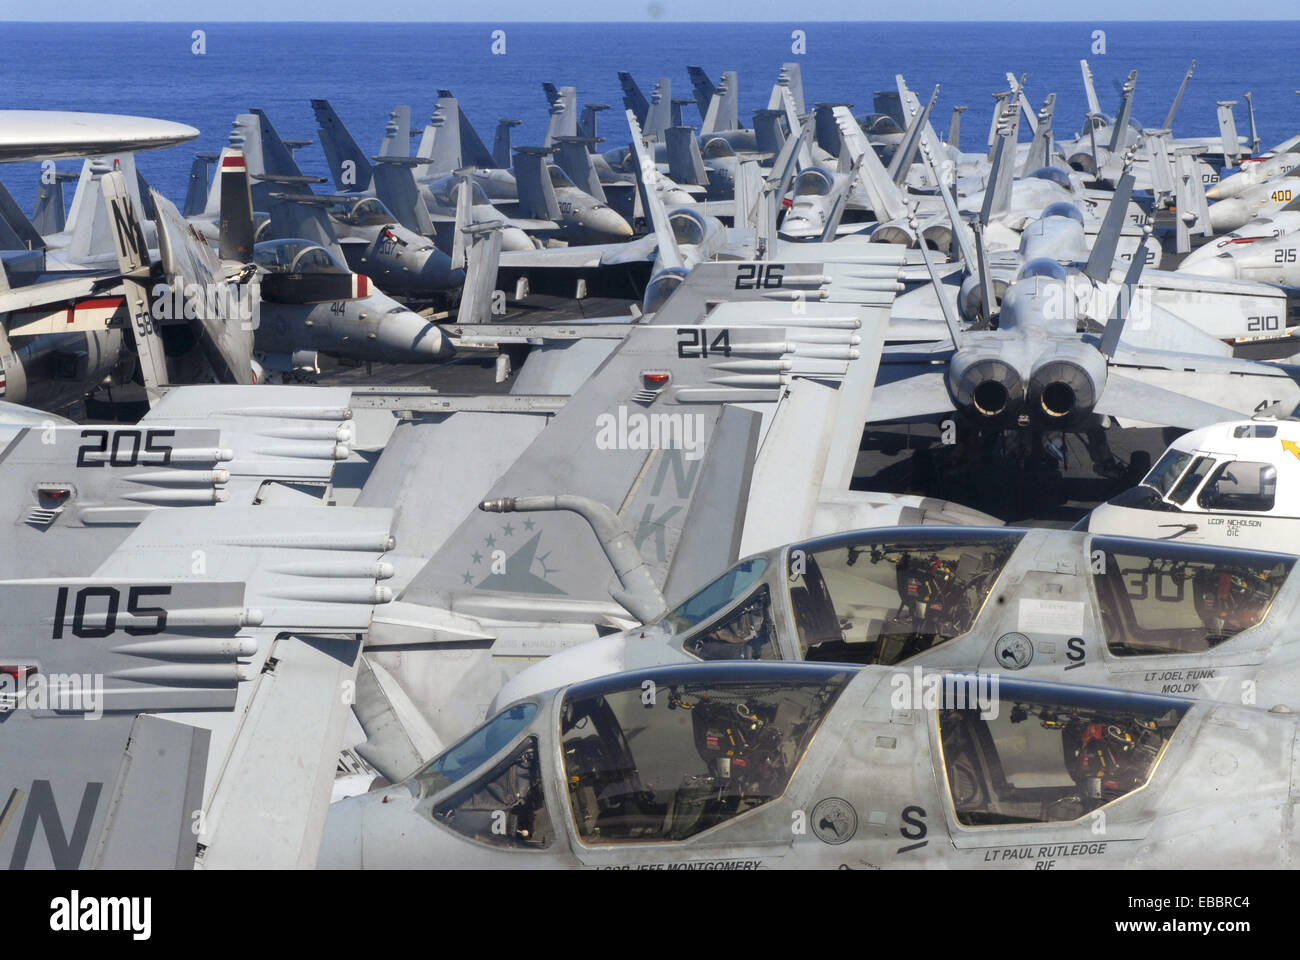 SOUTH CHINA SEA (Apr. 6, 2007) - Aircraft assigned to Carrier Air Wing (CVW) 14 are stacked on the bow of USS Ronald Reagan Stock Photo